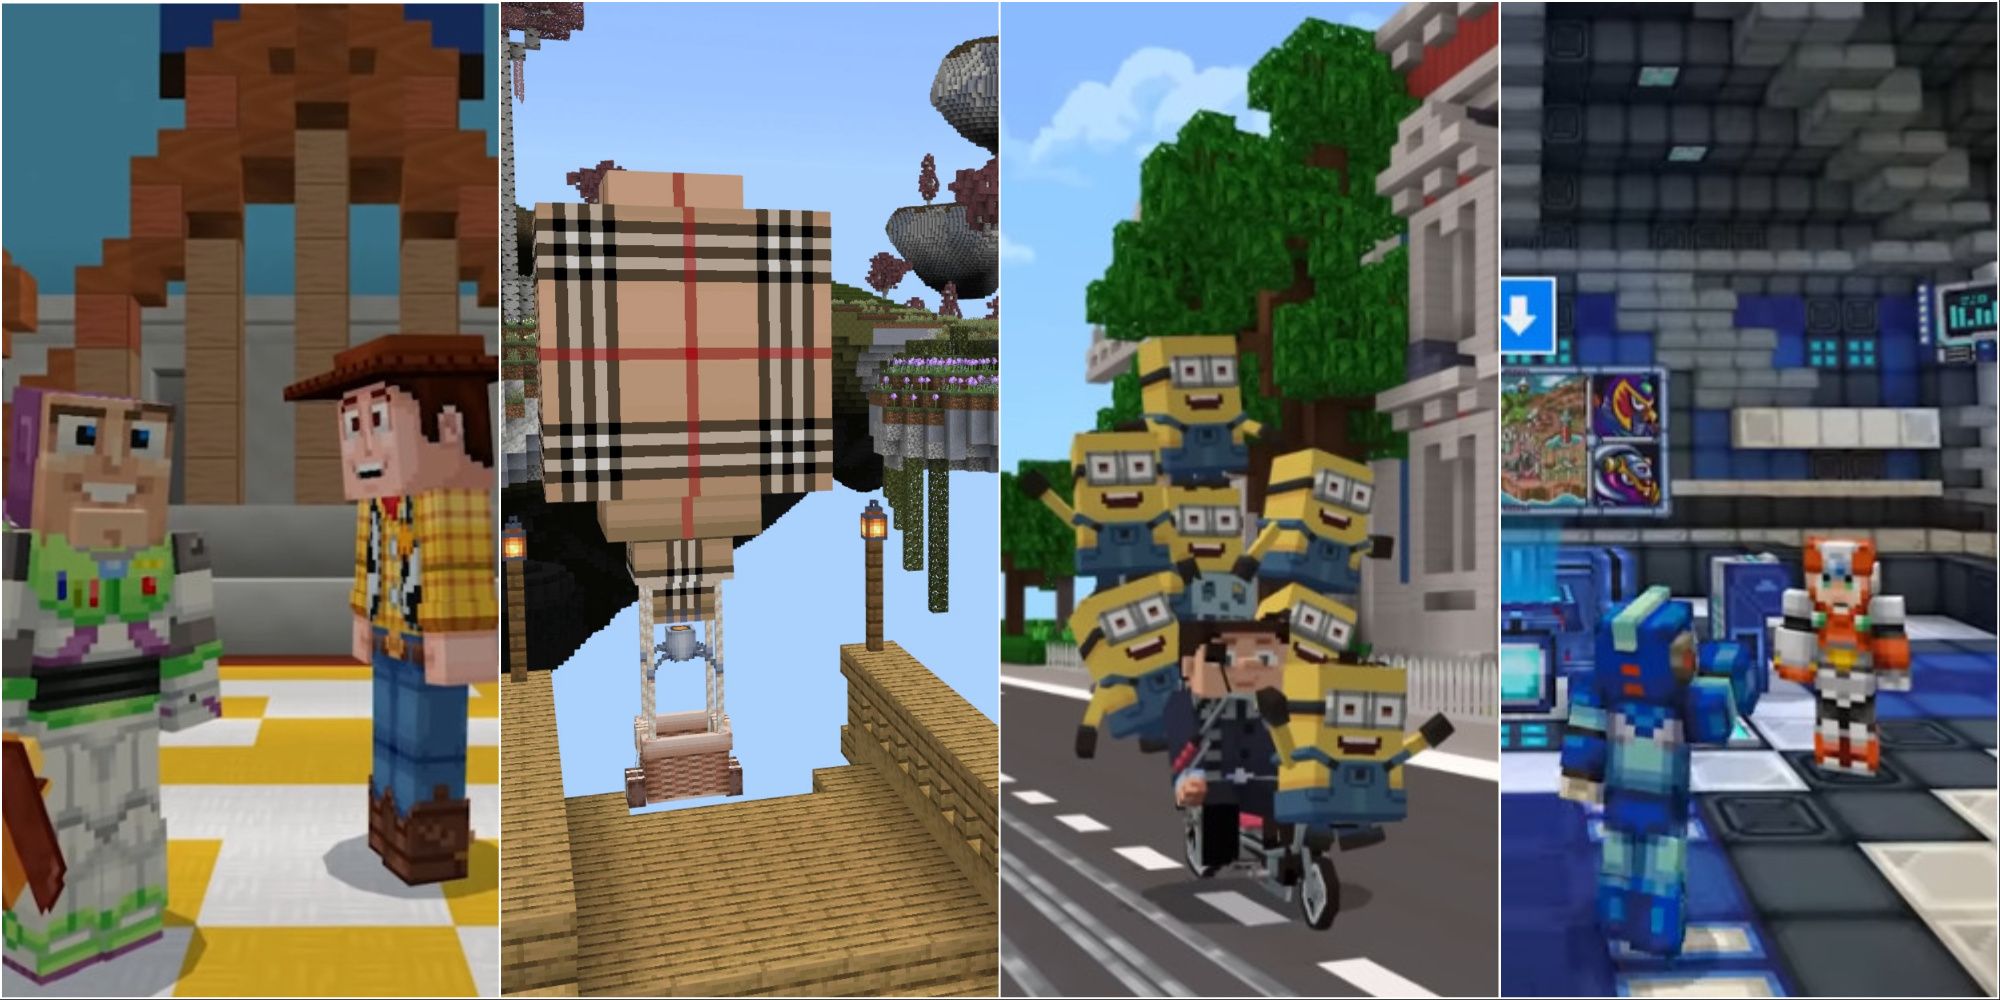 From left to right, a selection of different Minecraft collab DLCs: Toy Story, Burberry, Minions, and Megaman X.